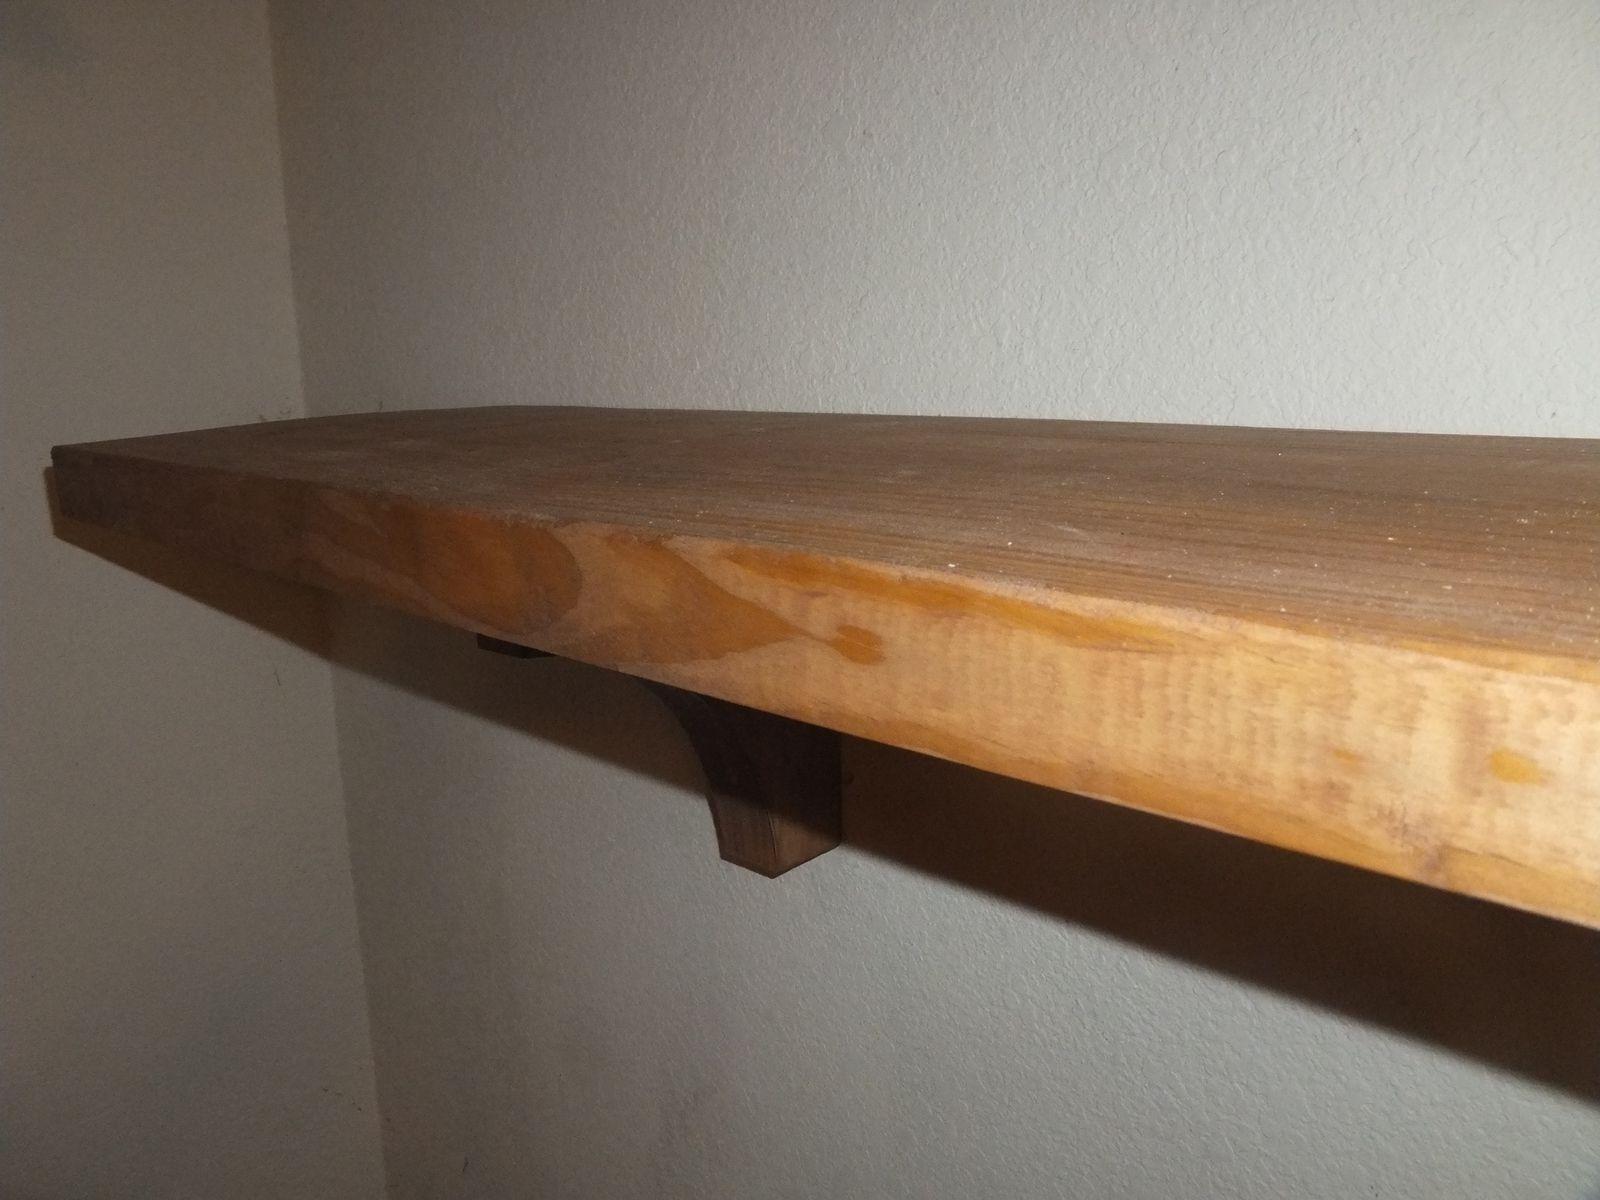 Widely Used Handmade Wooden Shelves Pertaining To Handmade Reclaimed Wood Shelfthh Creations (View 2 of 15)